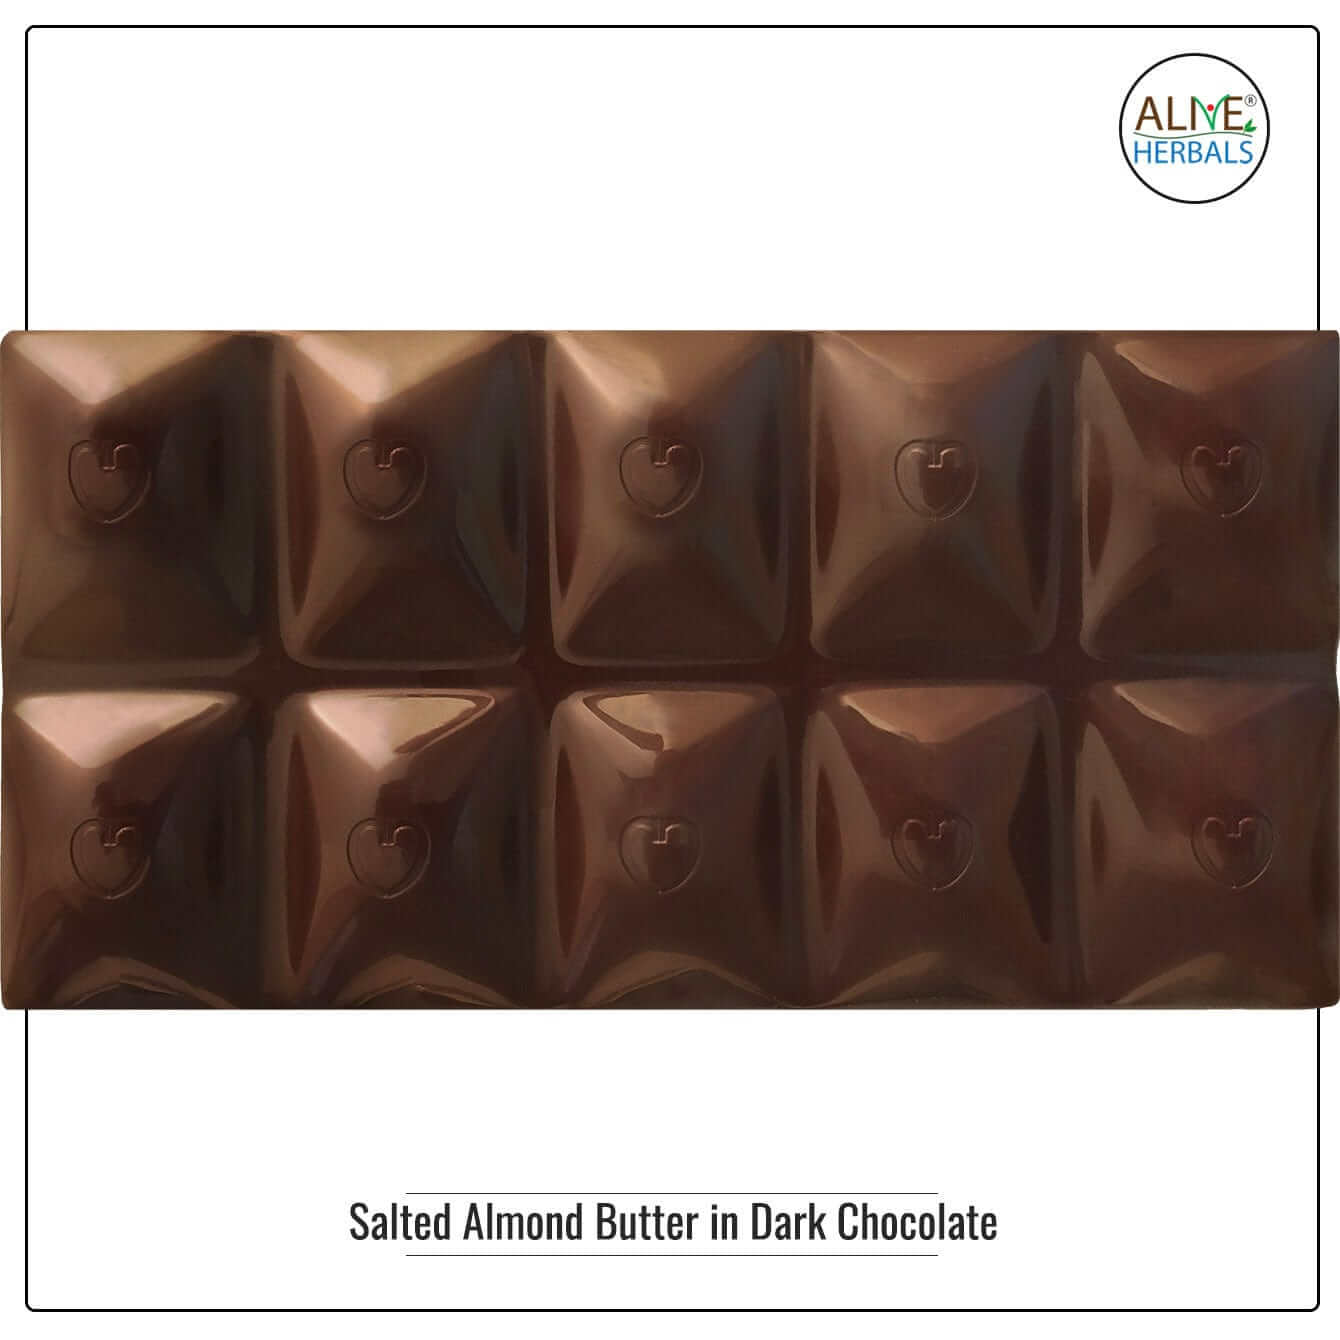 Salted Almond Butter in Dark Chocolate - Buy at Natural Food Store | Alive Herbals.